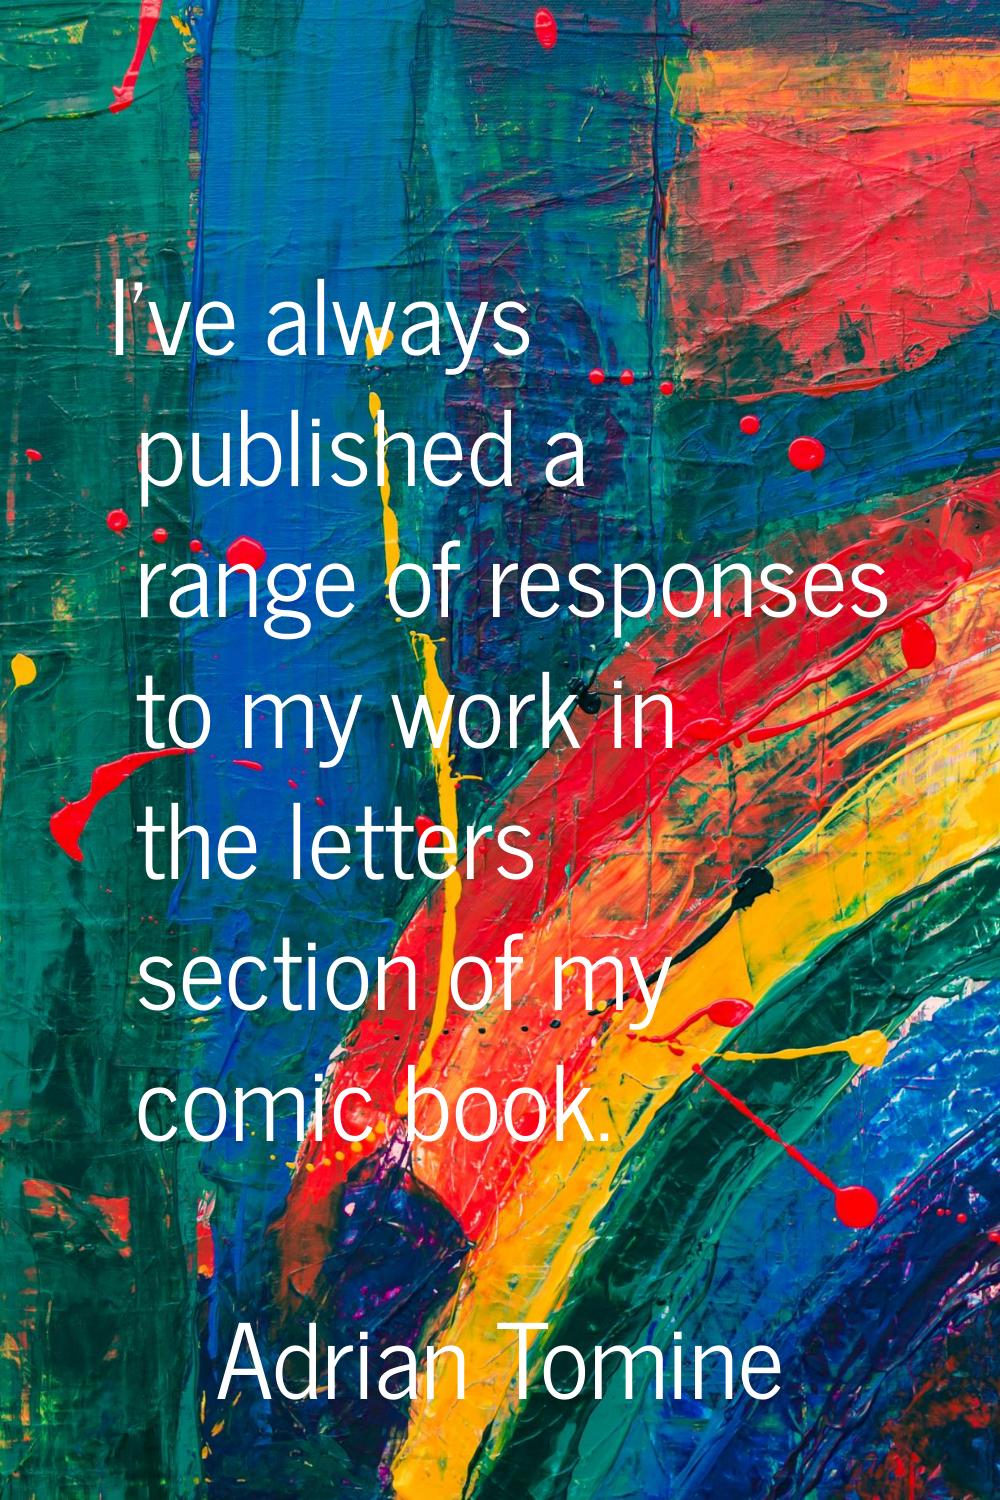 I've always published a range of responses to my work in the letters section of my comic book.